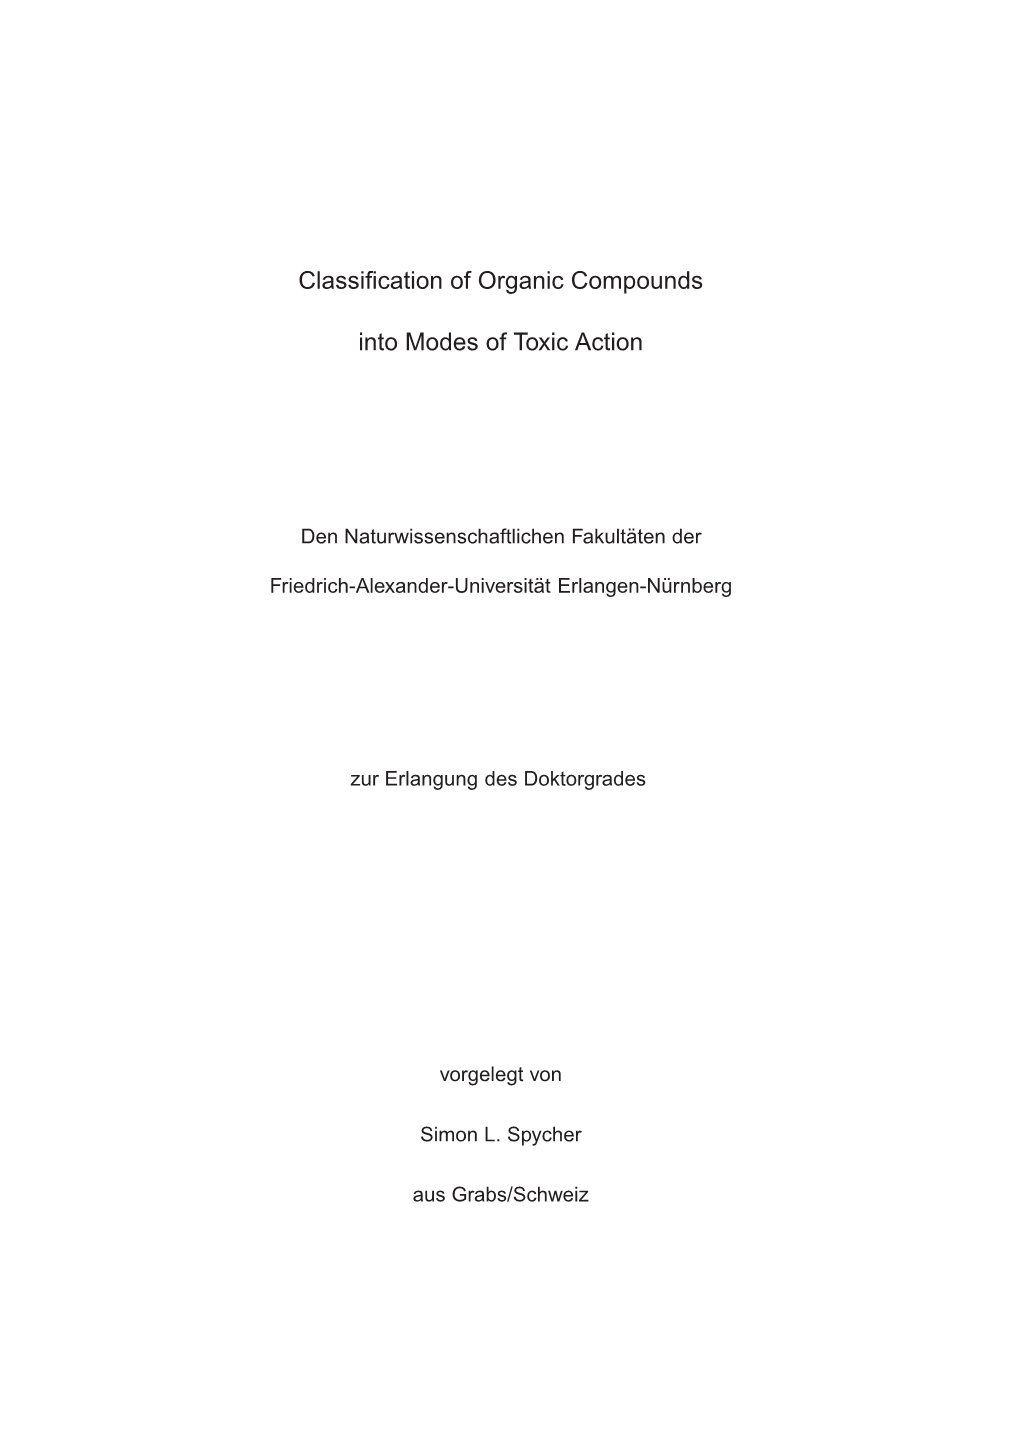 Classification of Organic Compounds Into Modes of Toxic Action